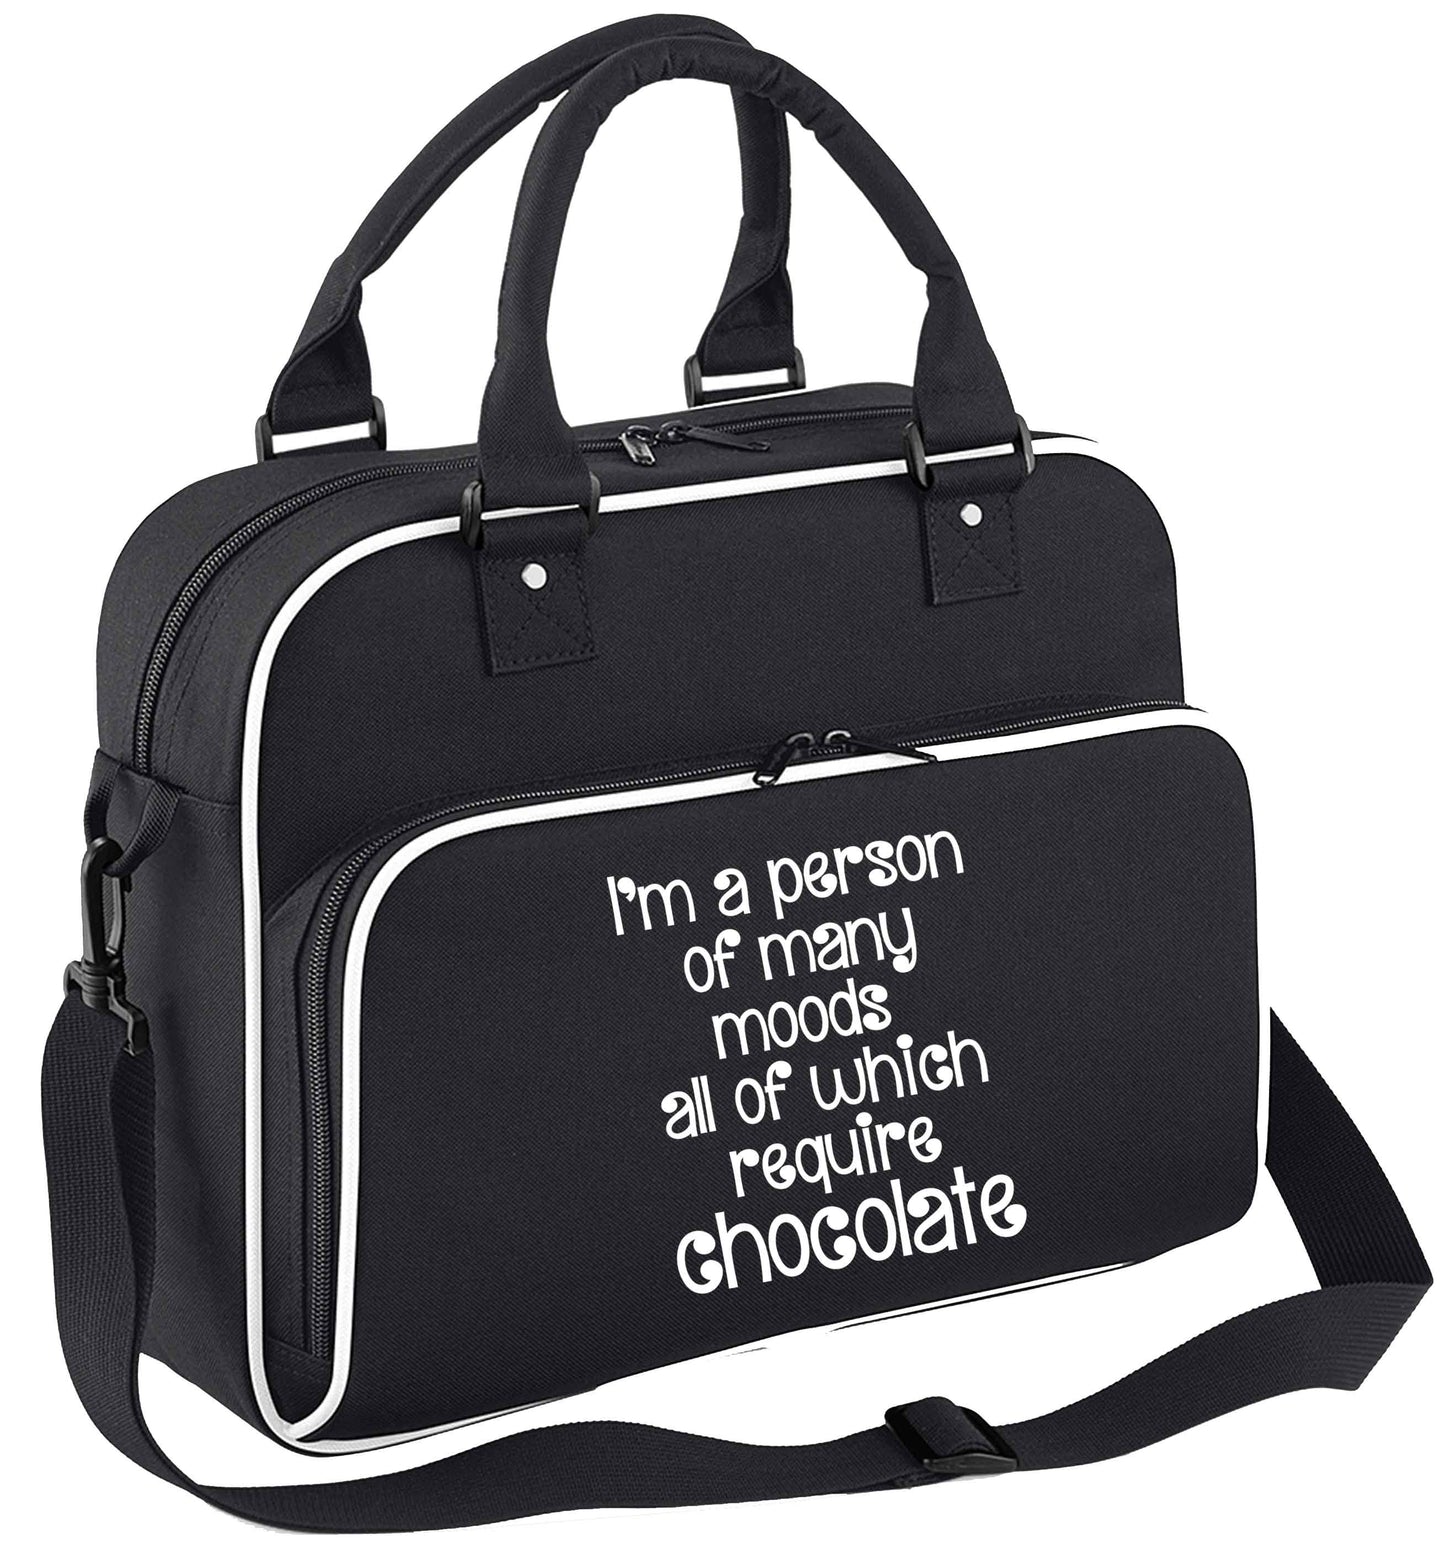 funny gift for a chocaholic! I'm a person of many moods all of which require chocolate children's dance bag black with white detail